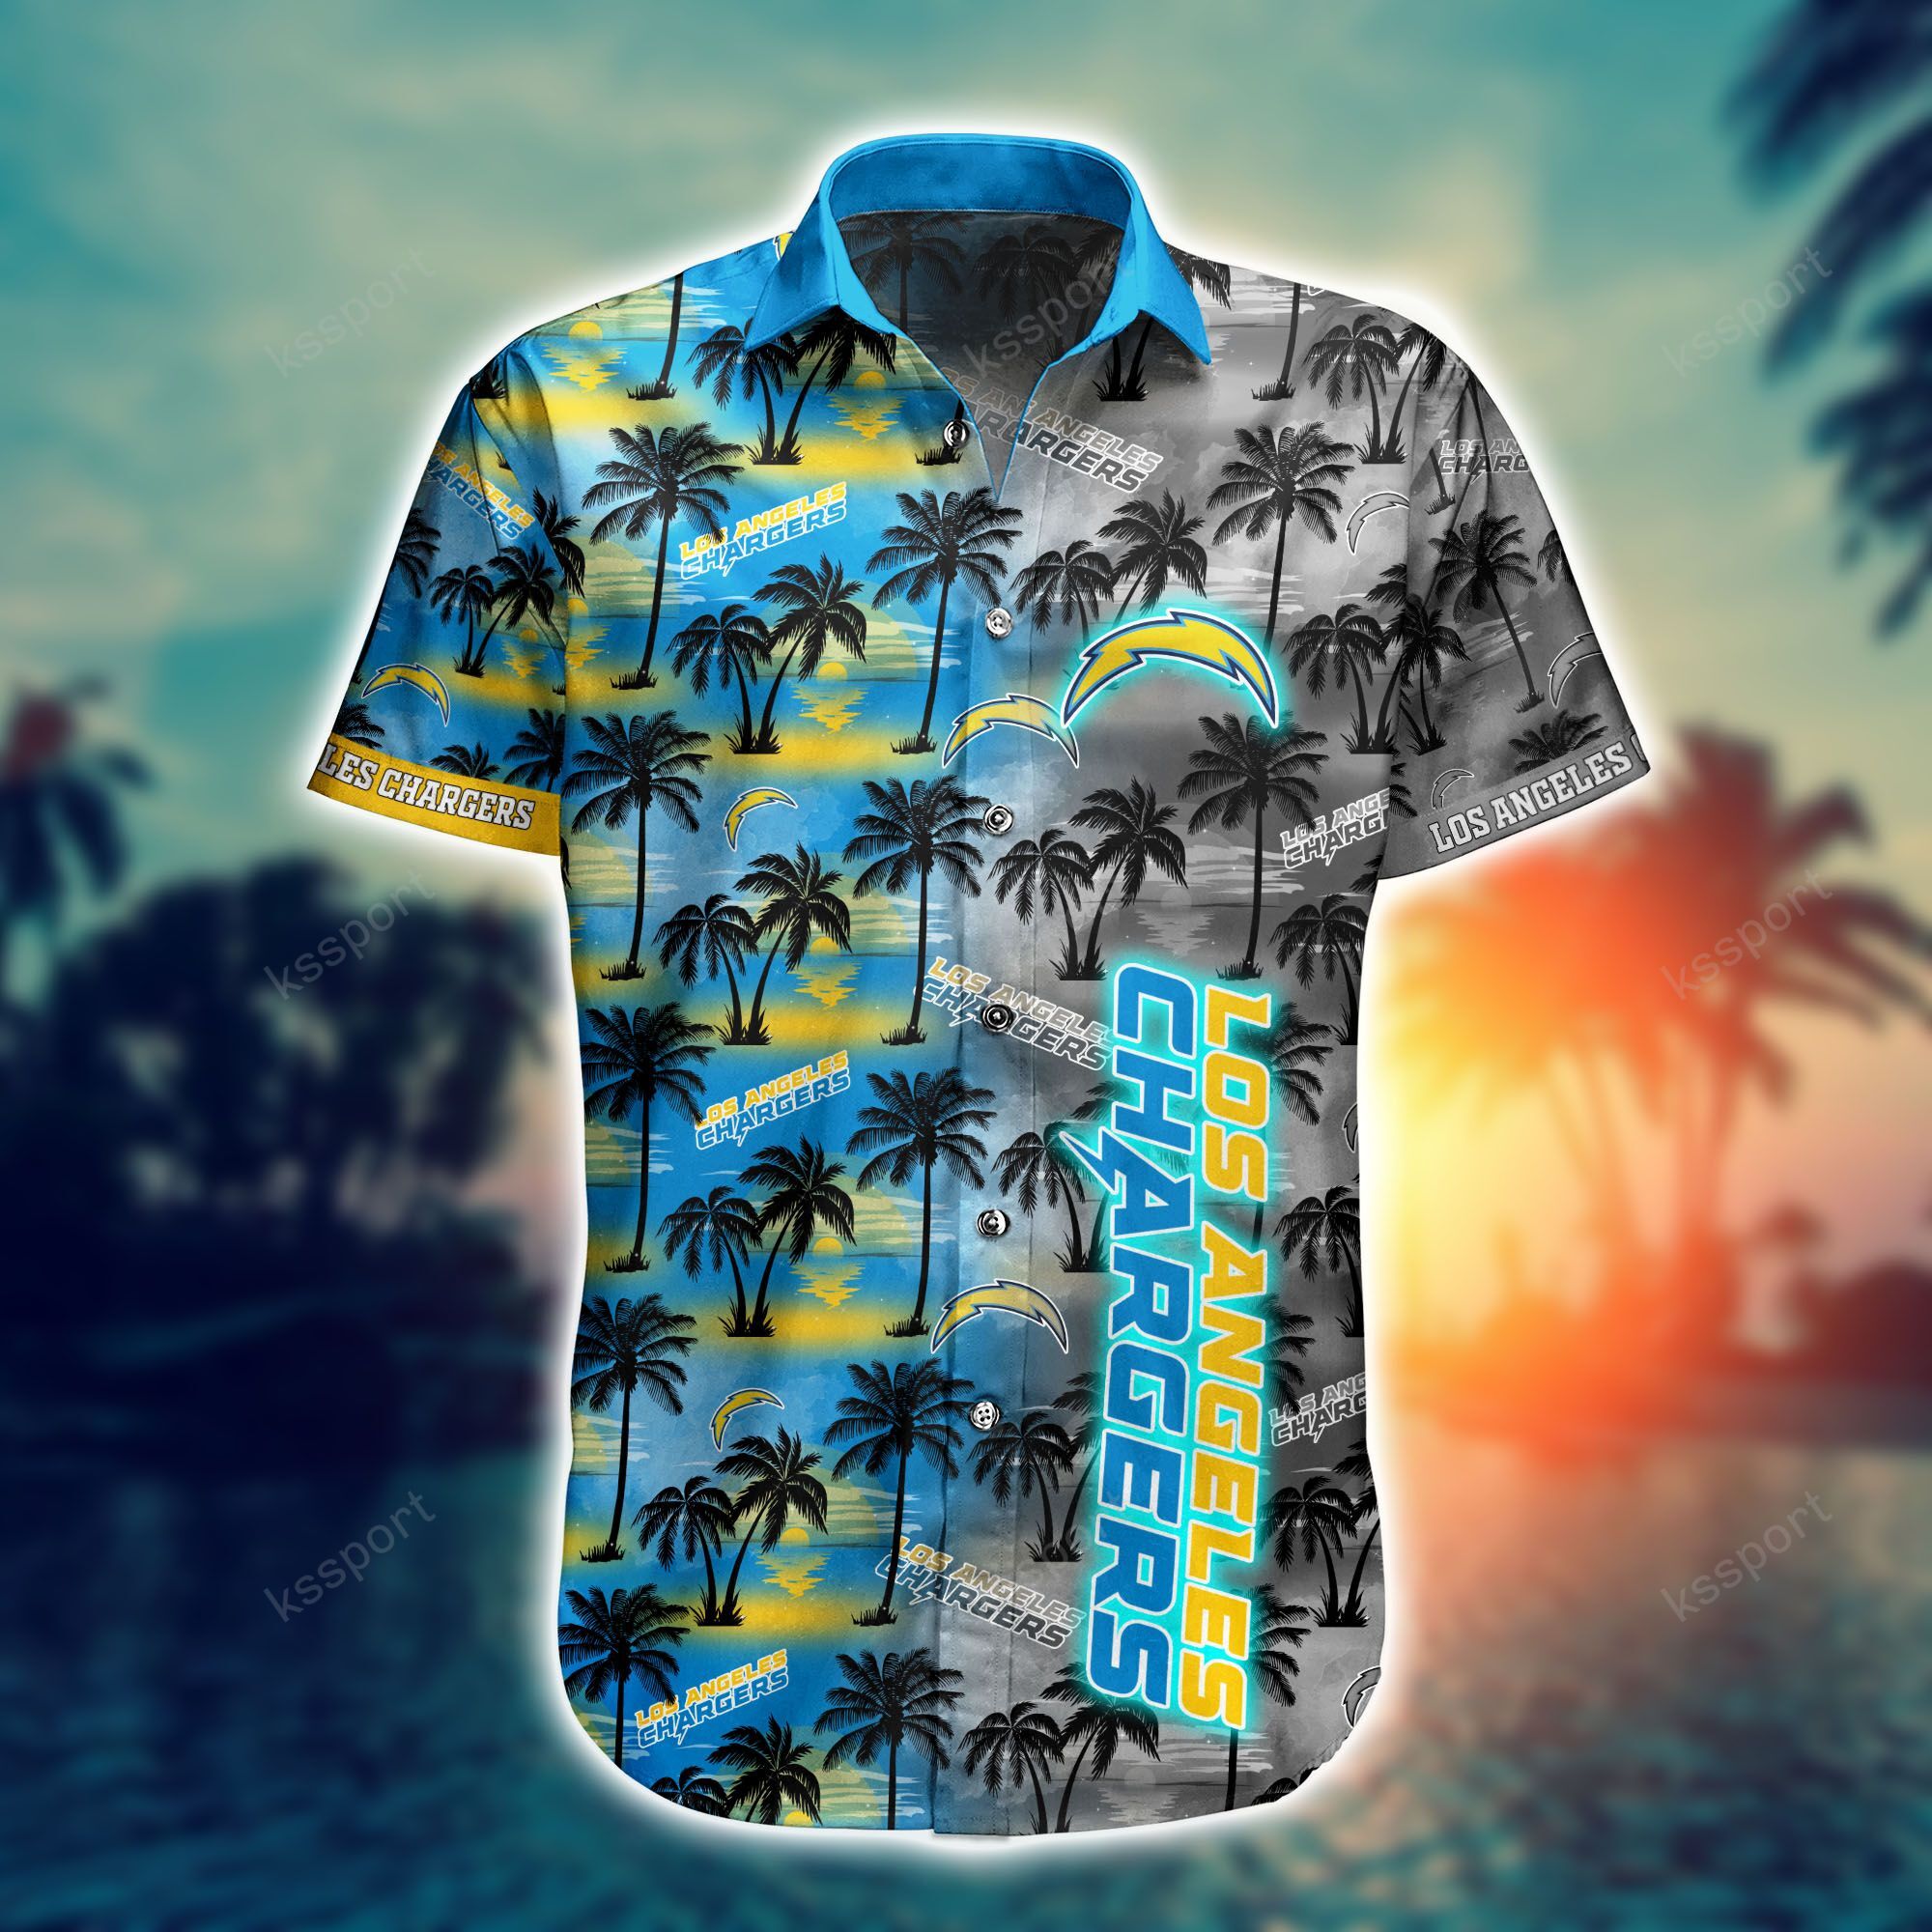 Top cool Hawaiian shirt 2022 - Make sure you get yours today before they run out! 206